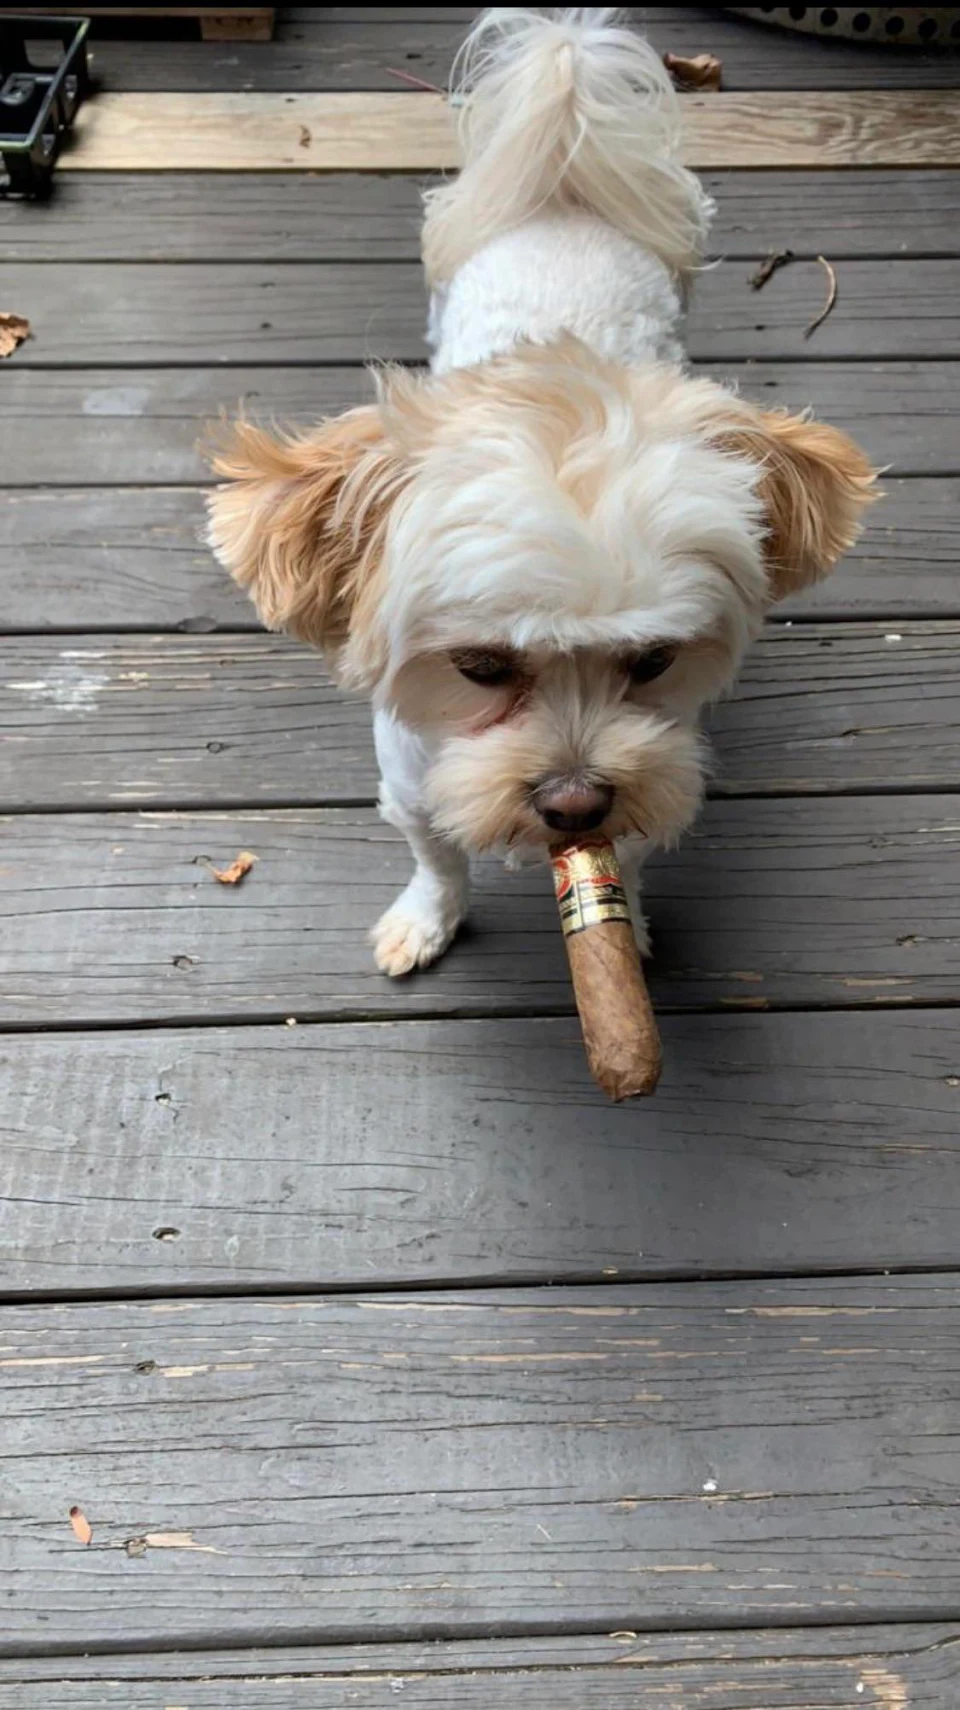 This dog with a cigar